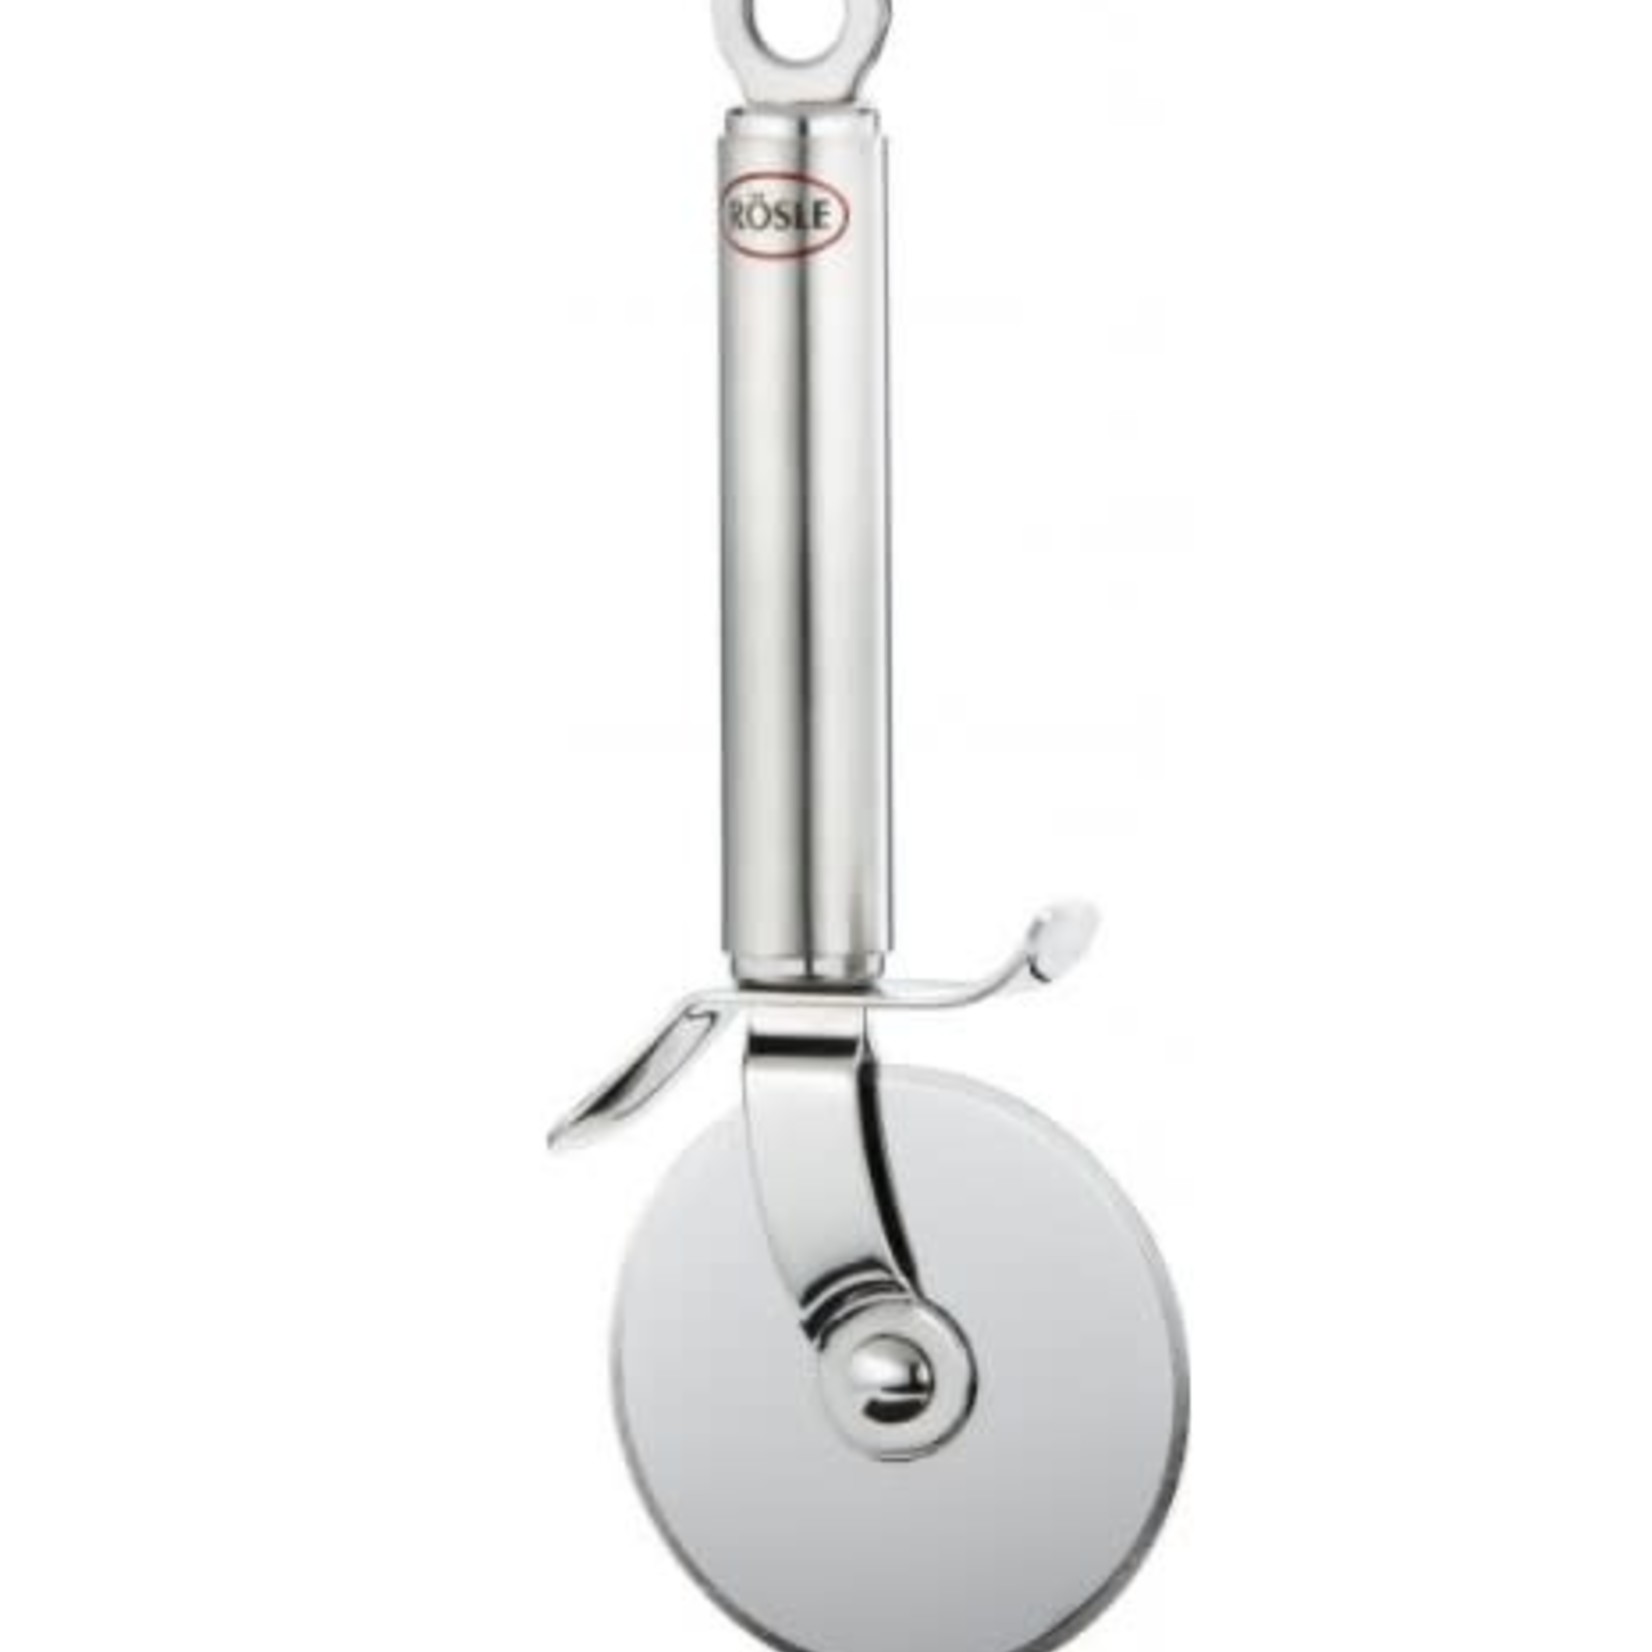 Rosle Rösle Pizza Cutter- with stem handle